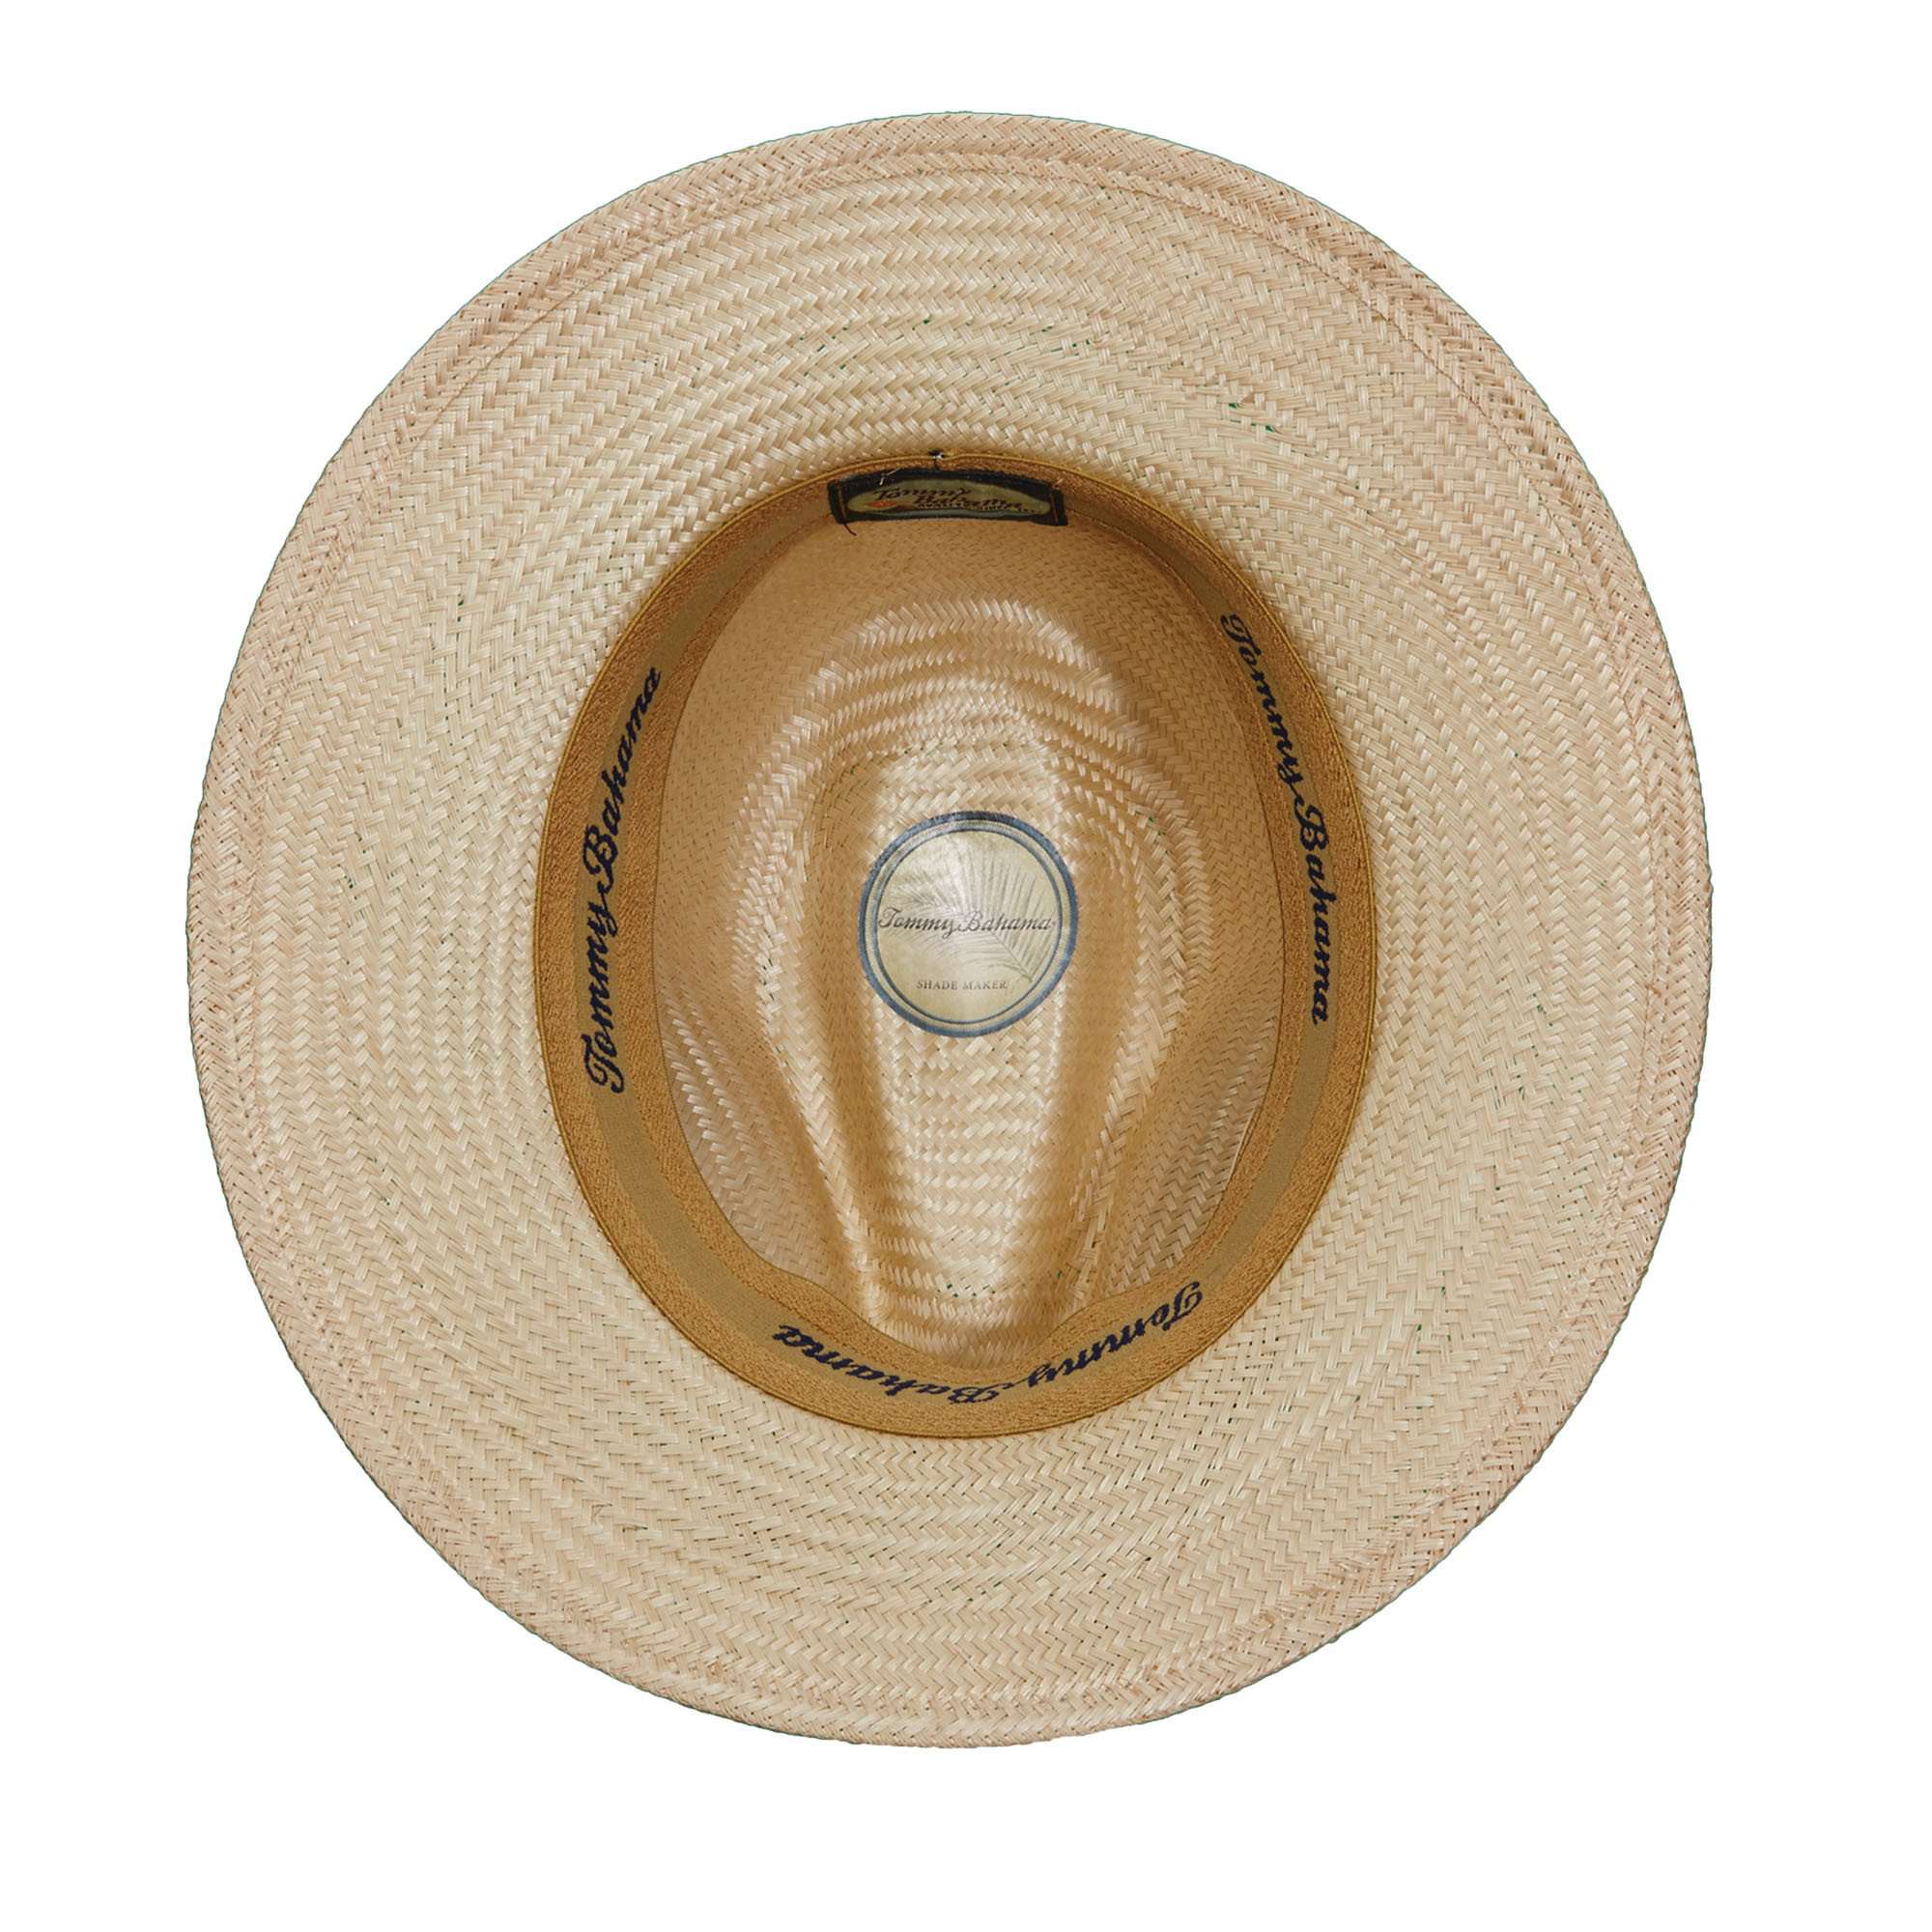 Tommy Bahama Balibuntal Safari Hat for Men -but Looks Awesome on